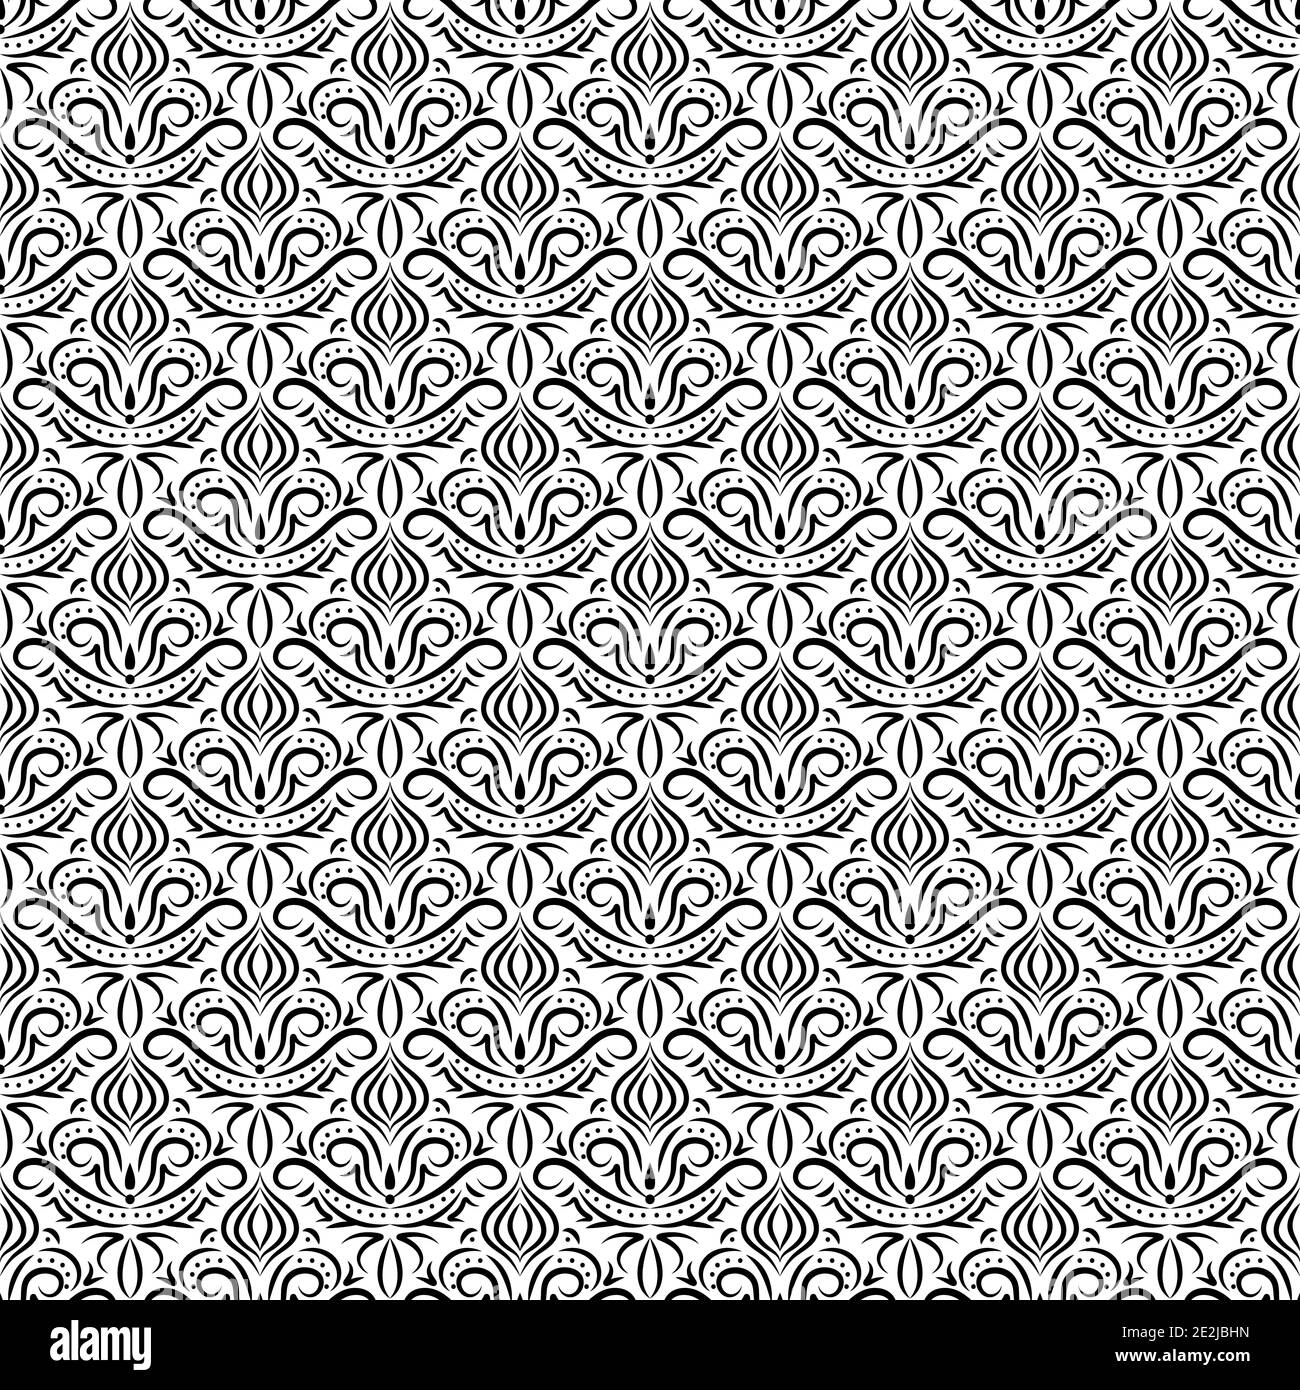 Seamless victorian pattern with floral ornament elements Stock Photo